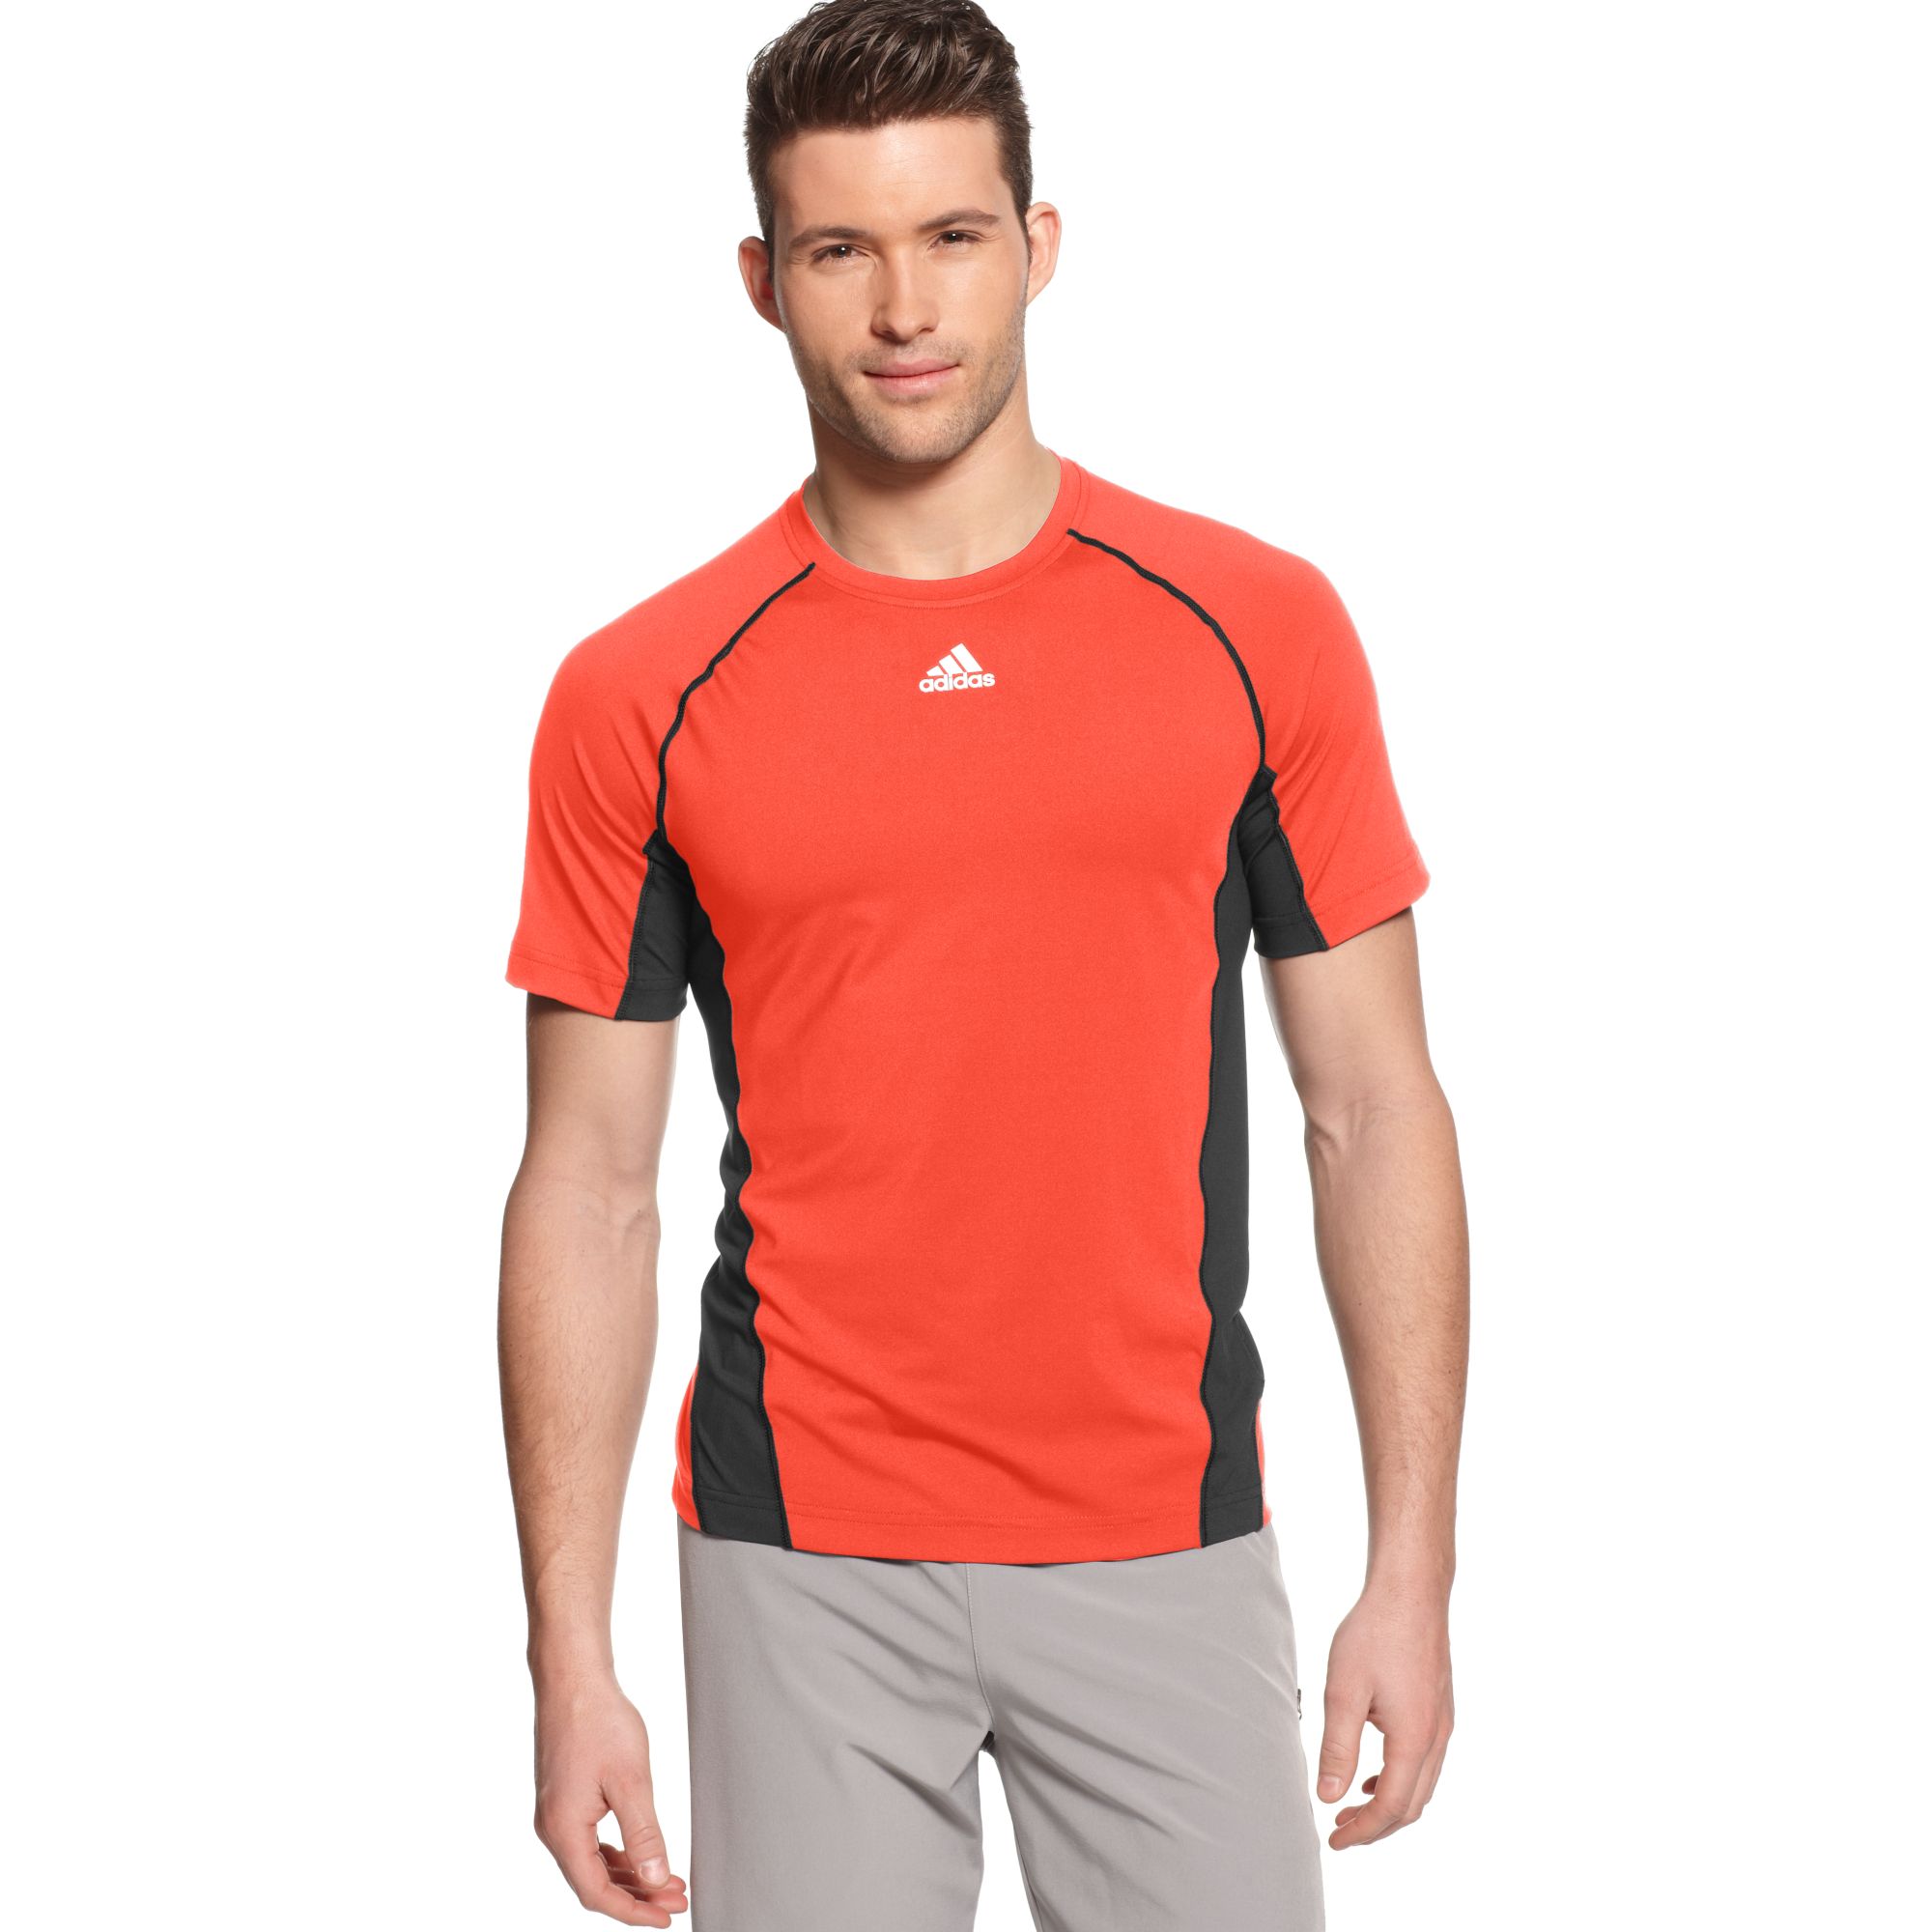 Adidas Climacool Fitted Short Sleeve Training T-shirt in Orange for Men